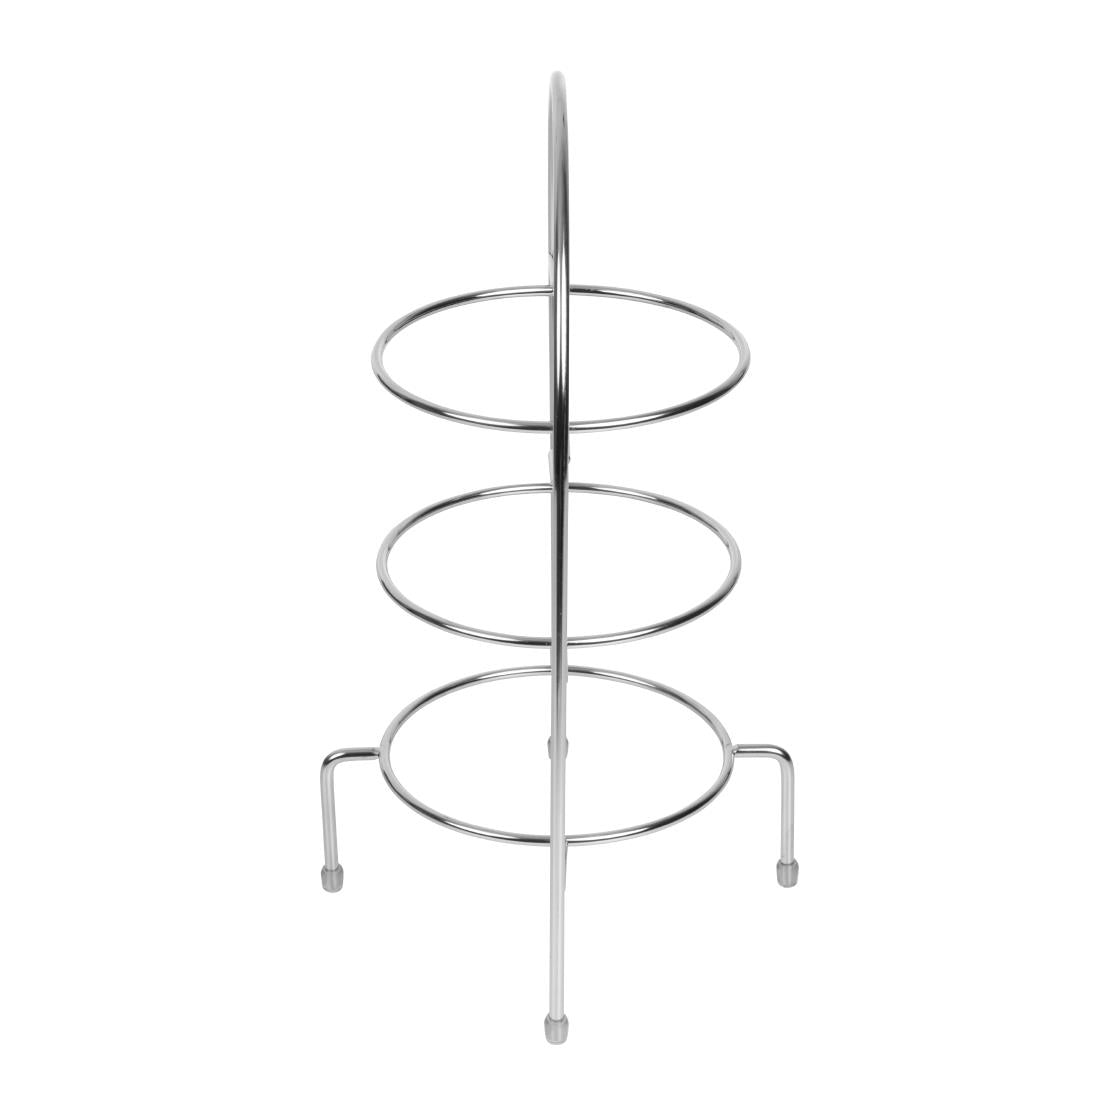 CL572 Afternoon Tea Stand for Plates Up To 267mm JD Catering Equipment Solutions Ltd